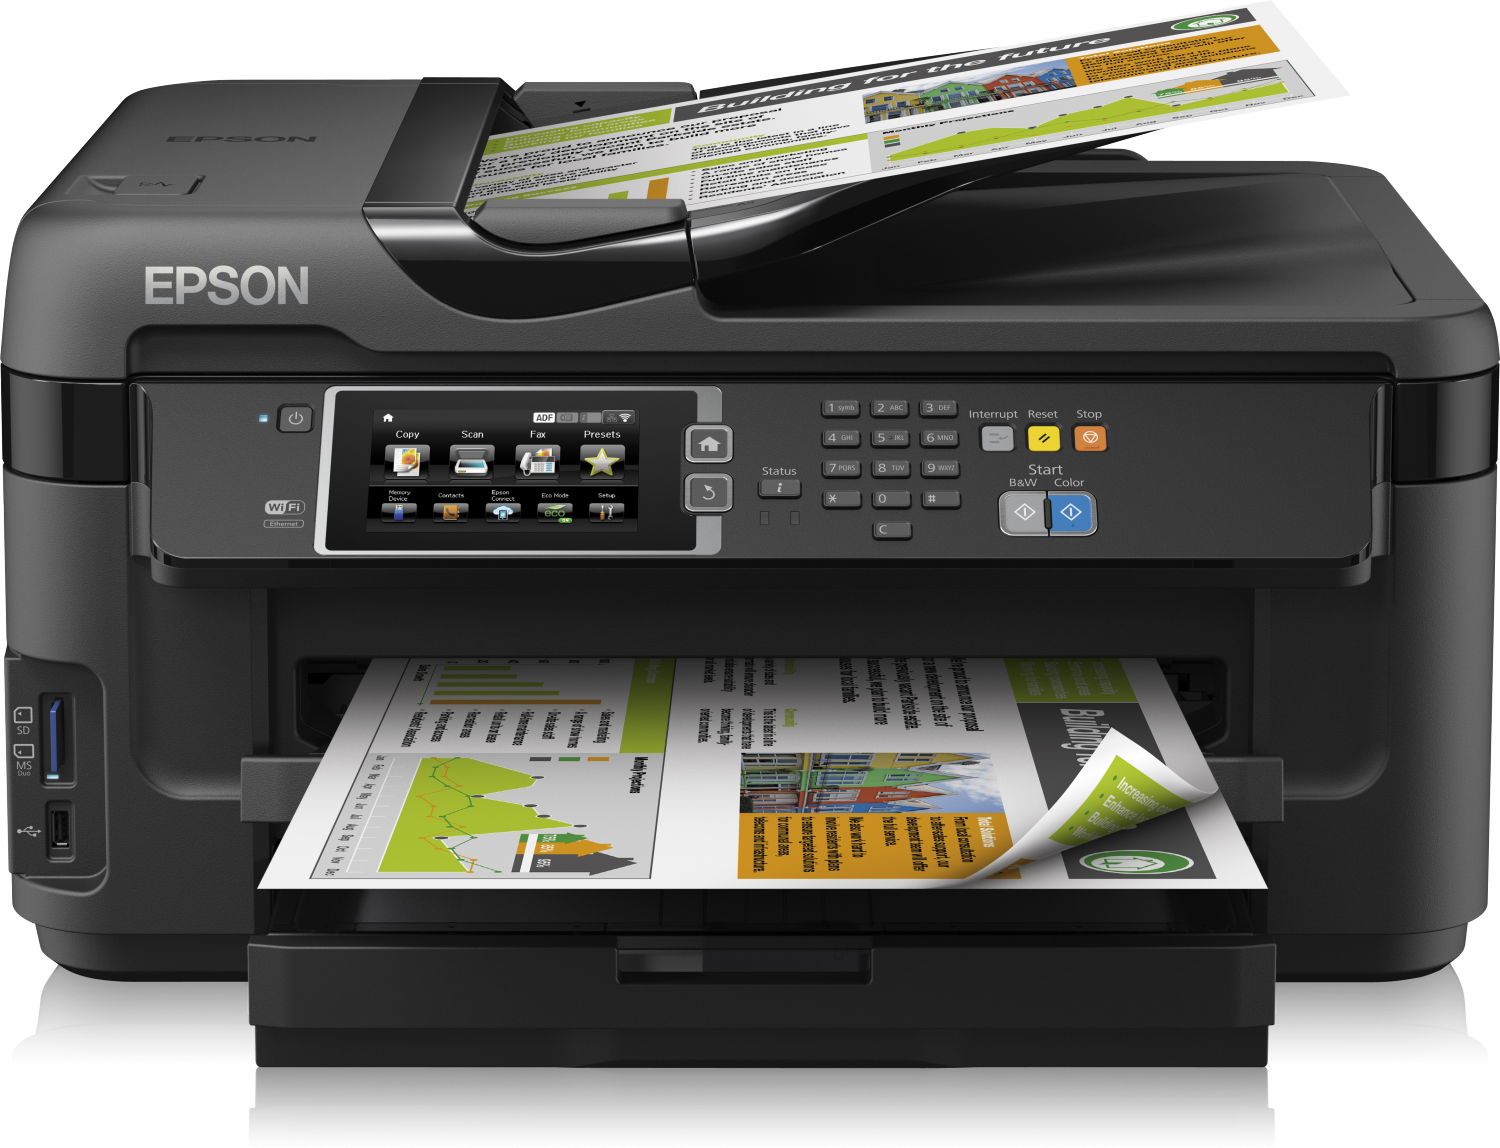 Epson WF-7610/WF-7610 Driver Linux Installation - Featured